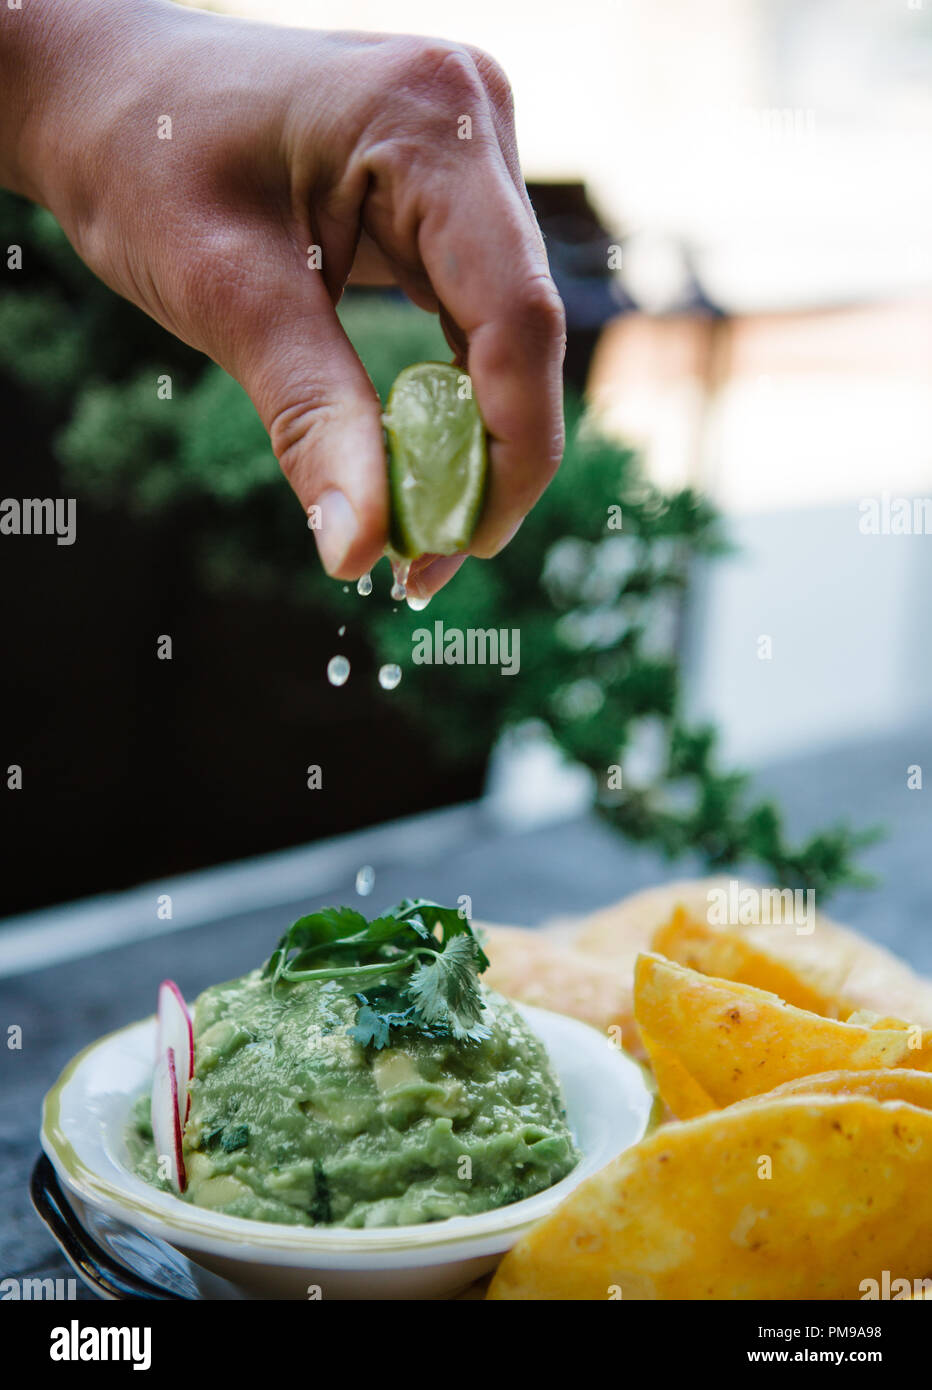 Tex-Mex meets fine dining with custom ceramic plates of traditional tex-mex dishes including tamales, mole, flautas, quesedillas, and nachos. Stock Photo